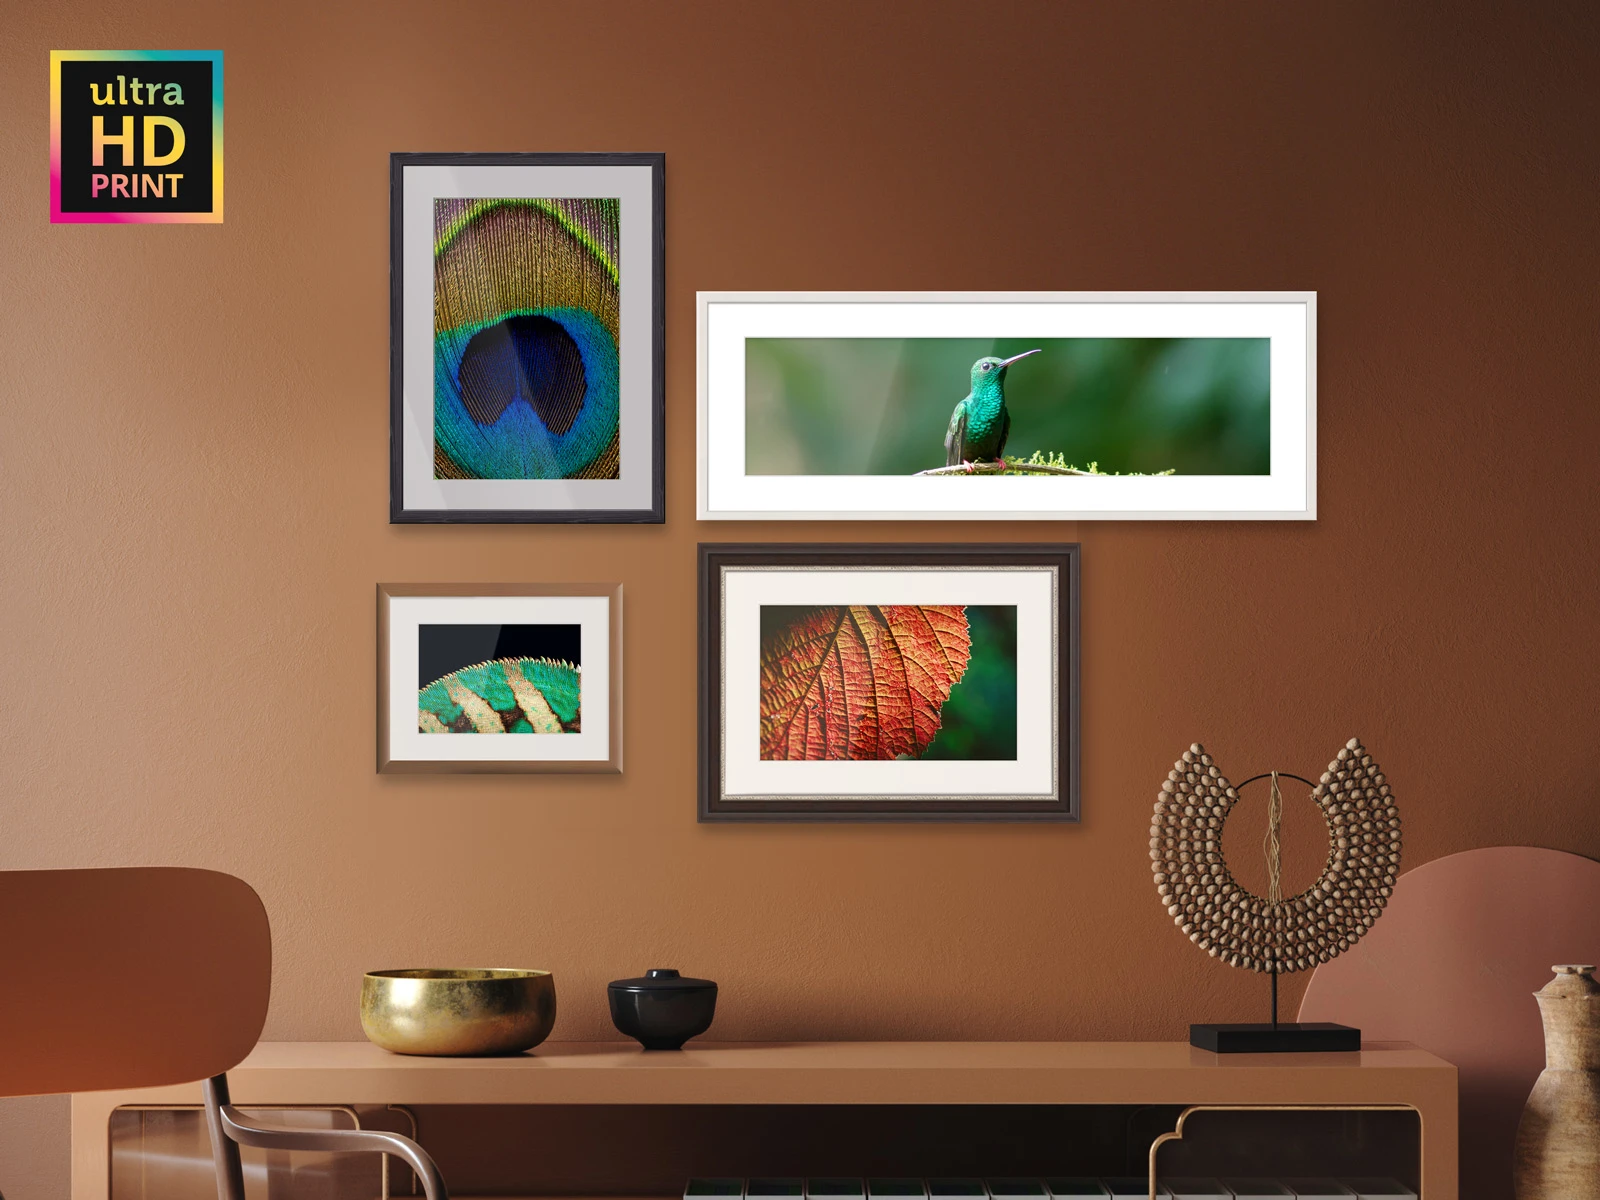 several ultraHD photo prints on Fuji Crystal Archive Maxima paper in frames hanging on a wall.